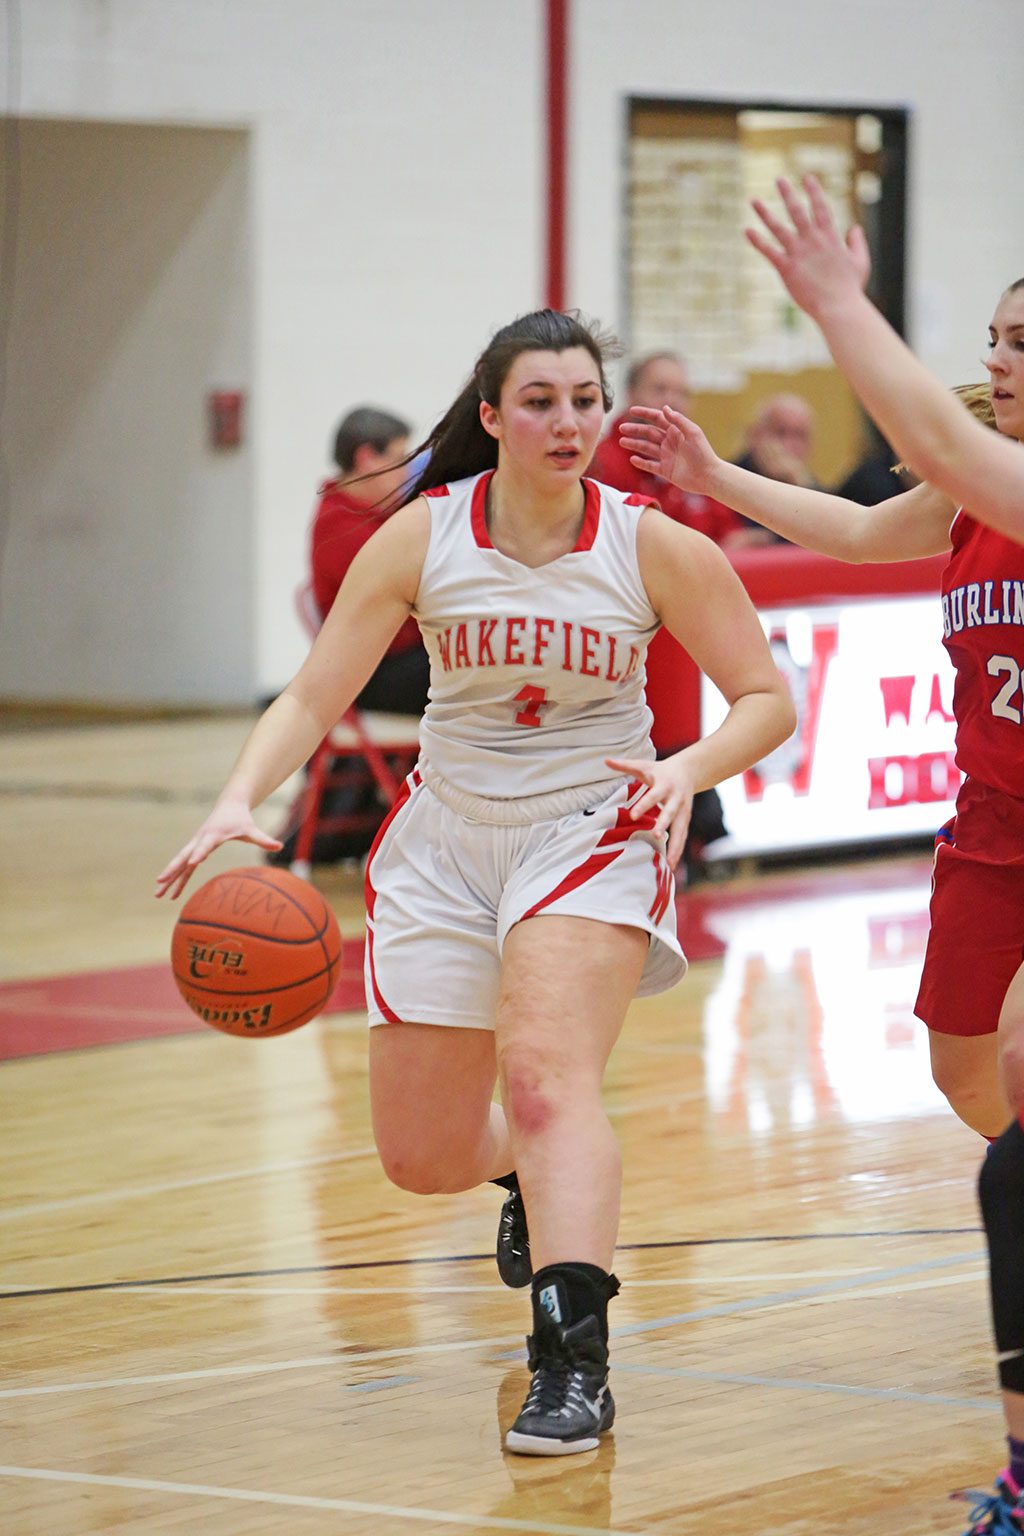 DANIELLA IANNUZZI, a senior forward, netted 12 points and led Wakefield in scoring in the Warriors’ game against Hingham last night in the first round of the General Patton Tournament at Hamilton-Wenham Regional High School. Wakefield lost, 56-36. (Donna Larsson File Photo)